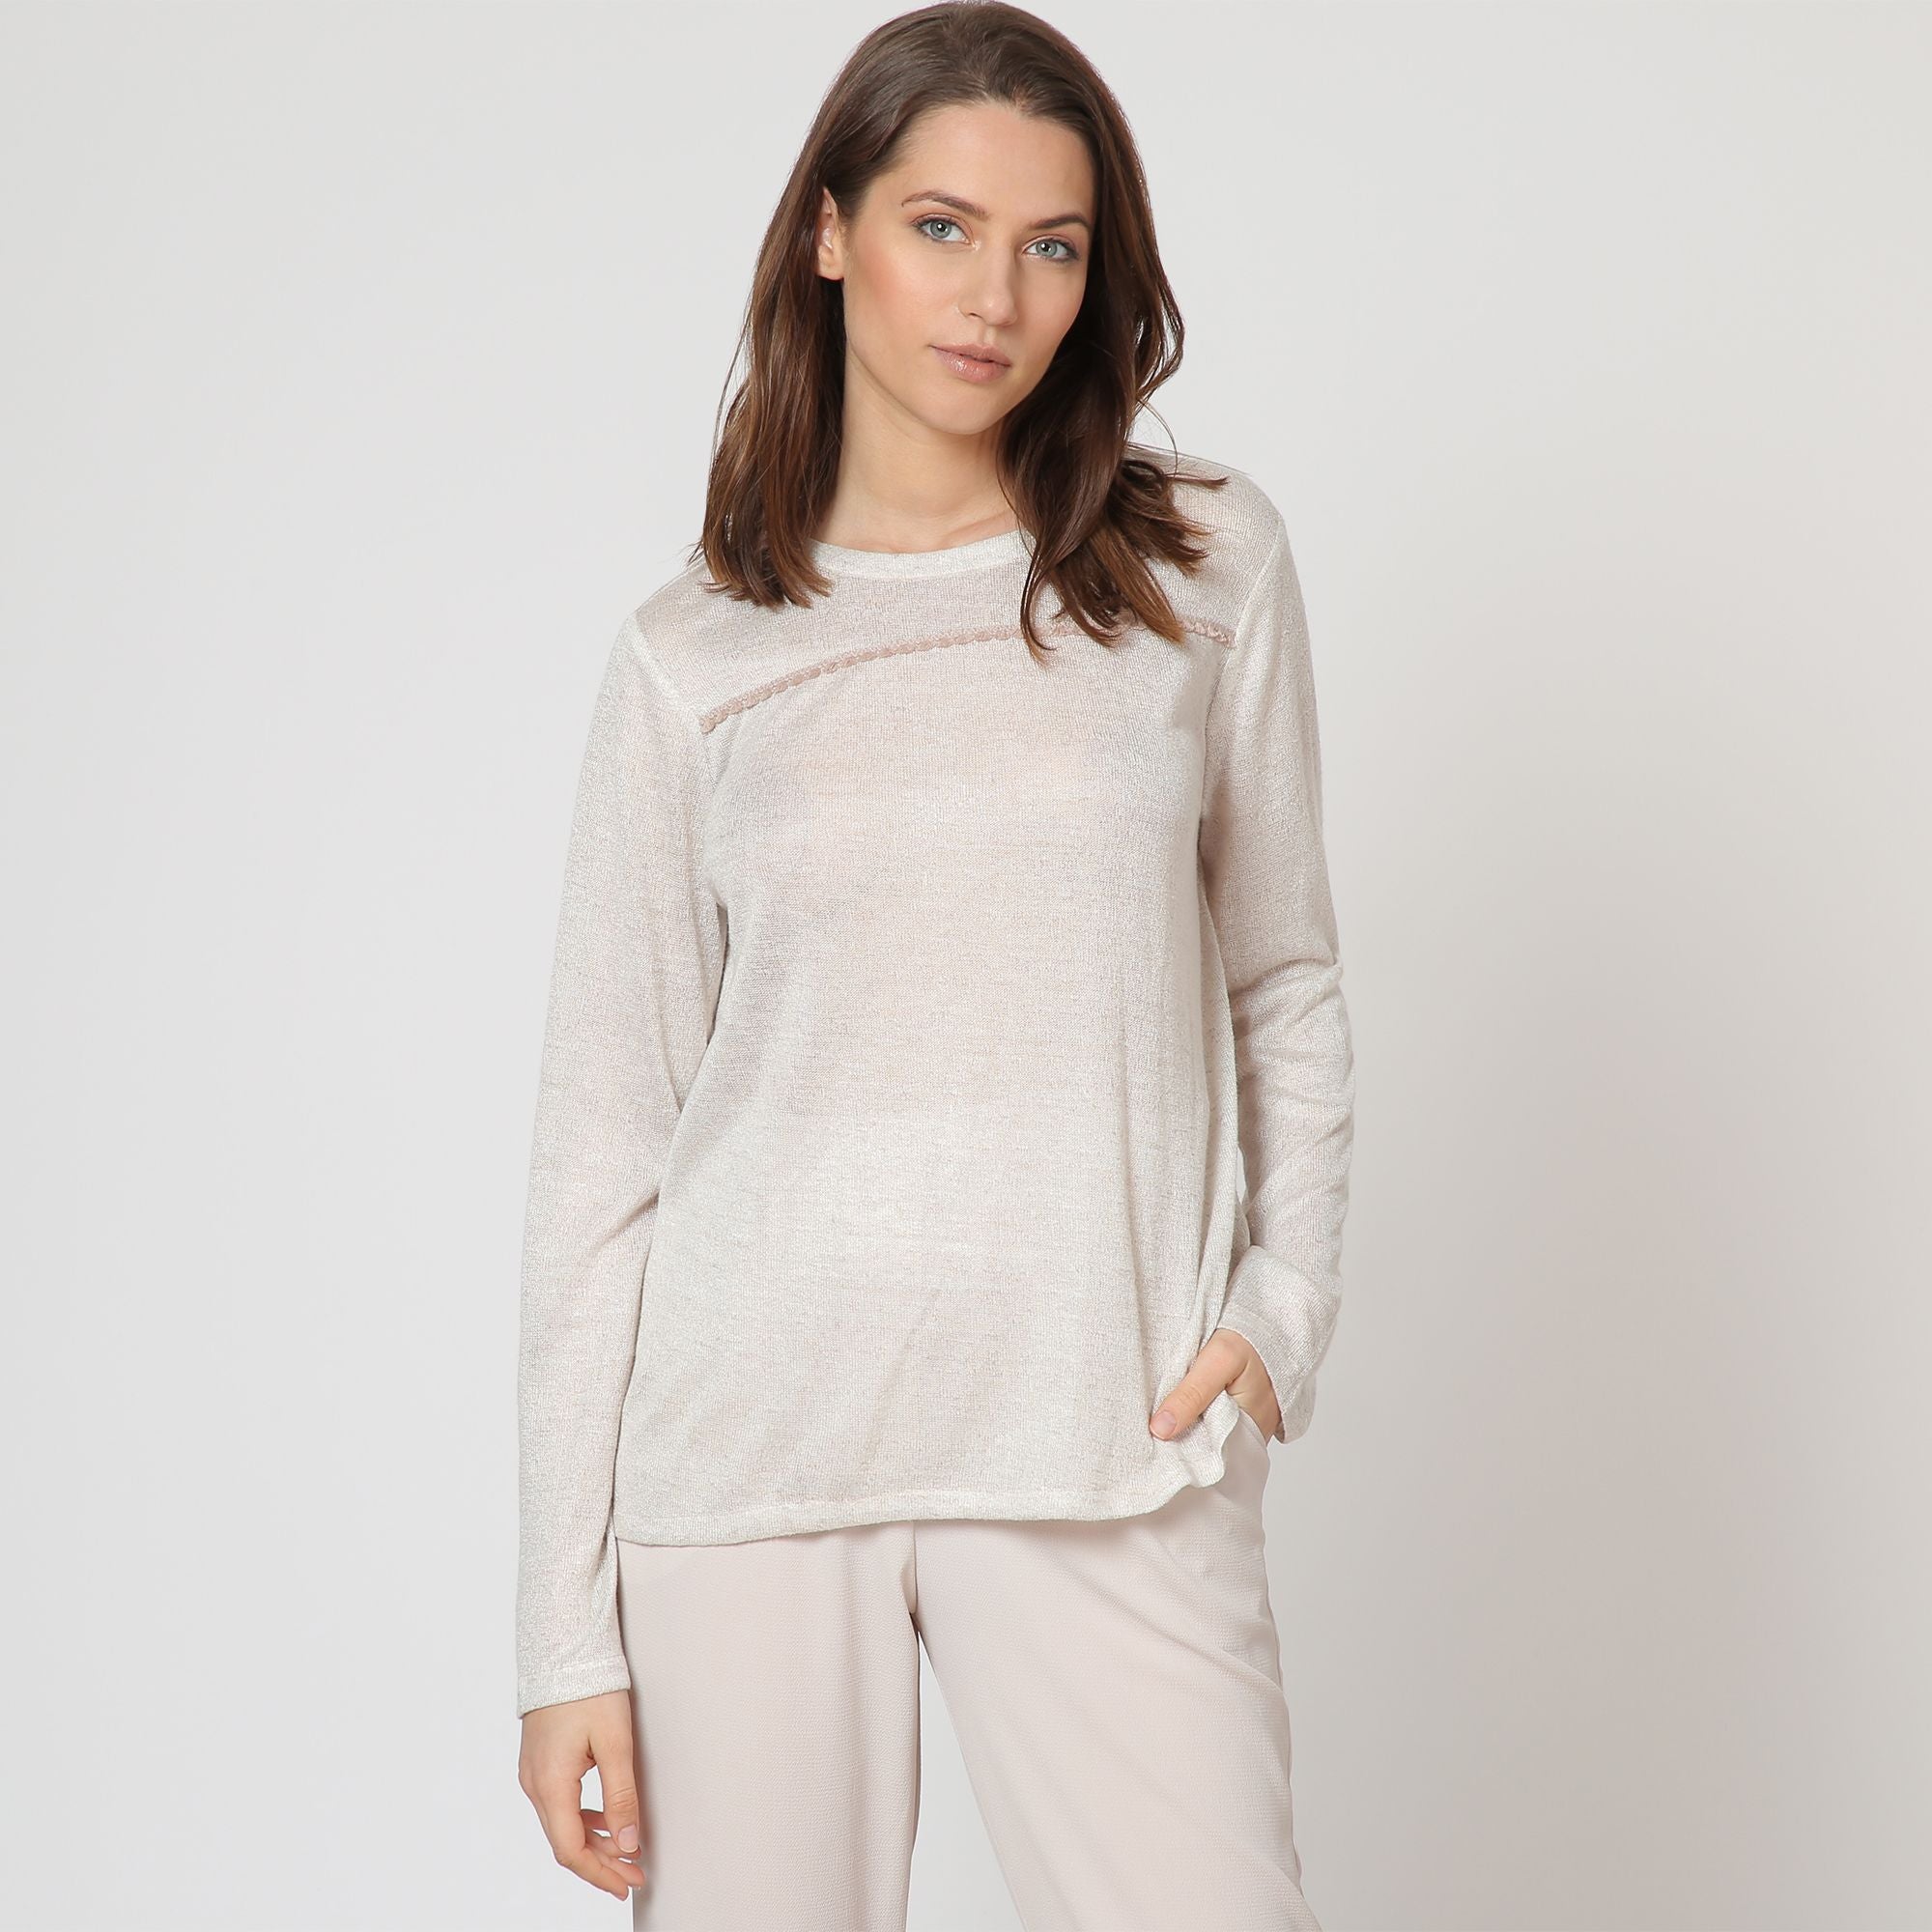 Knitted jumper/top ARENA